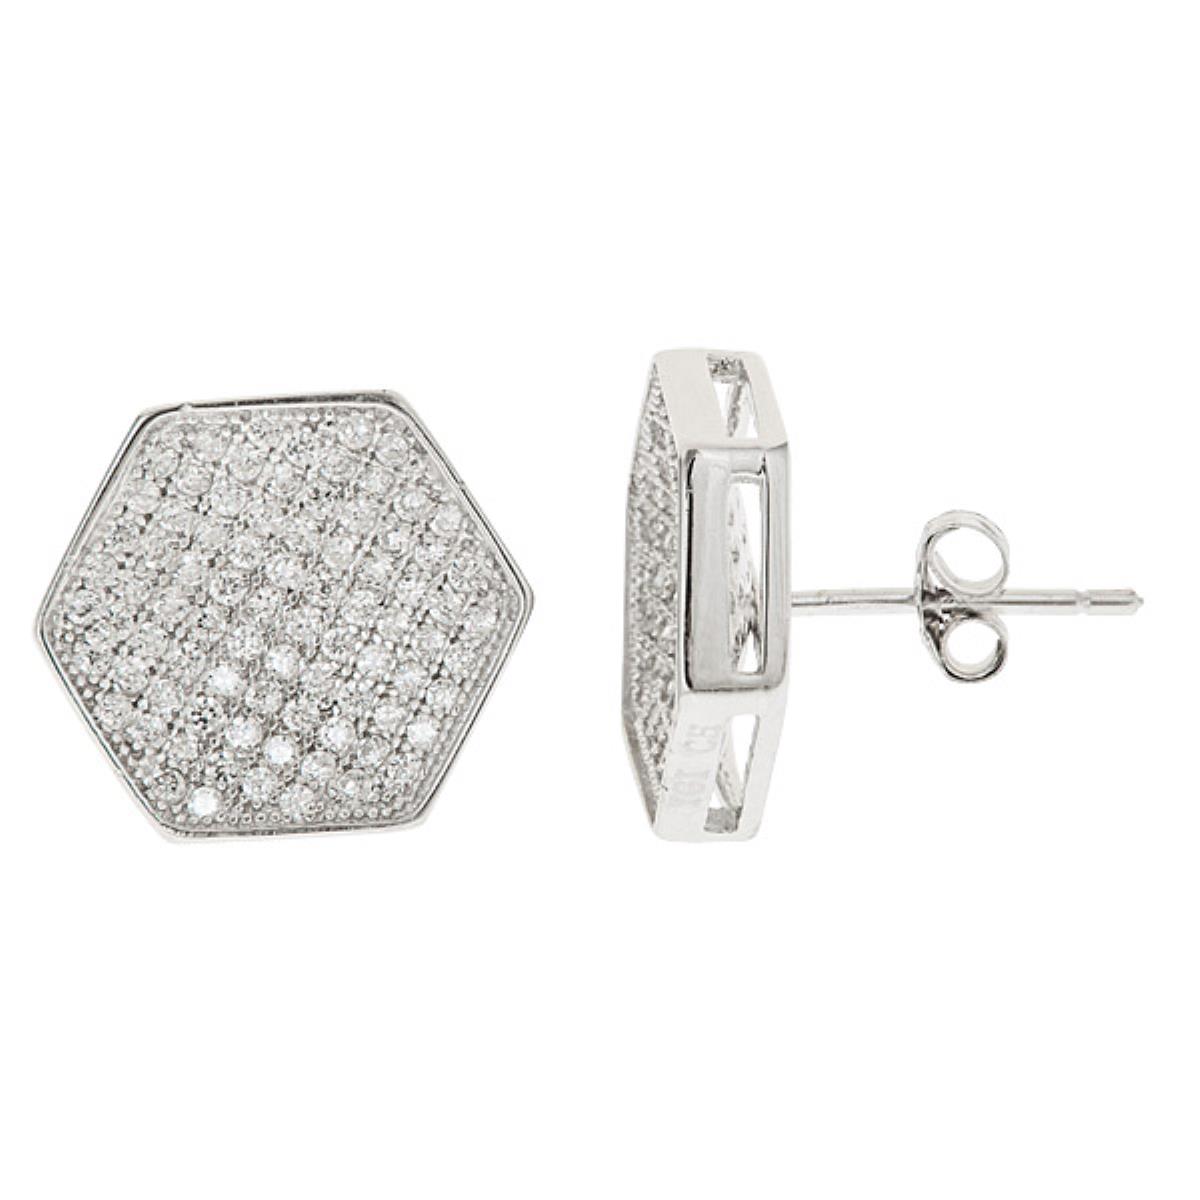 Sterling Silver Micorpave Octagon 15x15mm Stud Earring